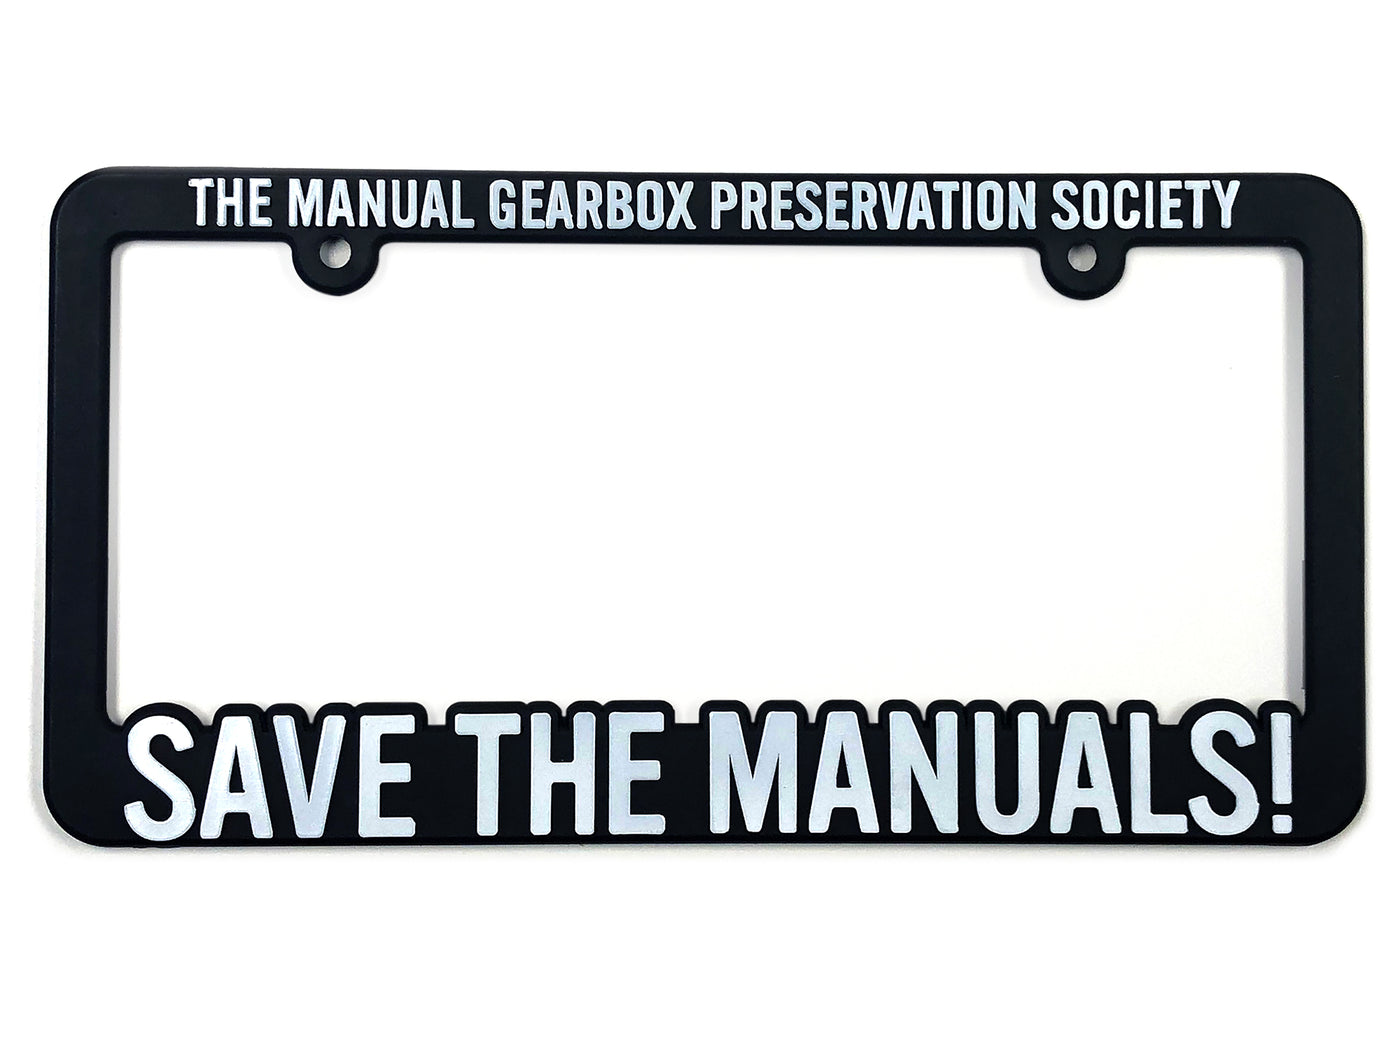 TMGPS SAVE THE MANUALS! License Plate Frame